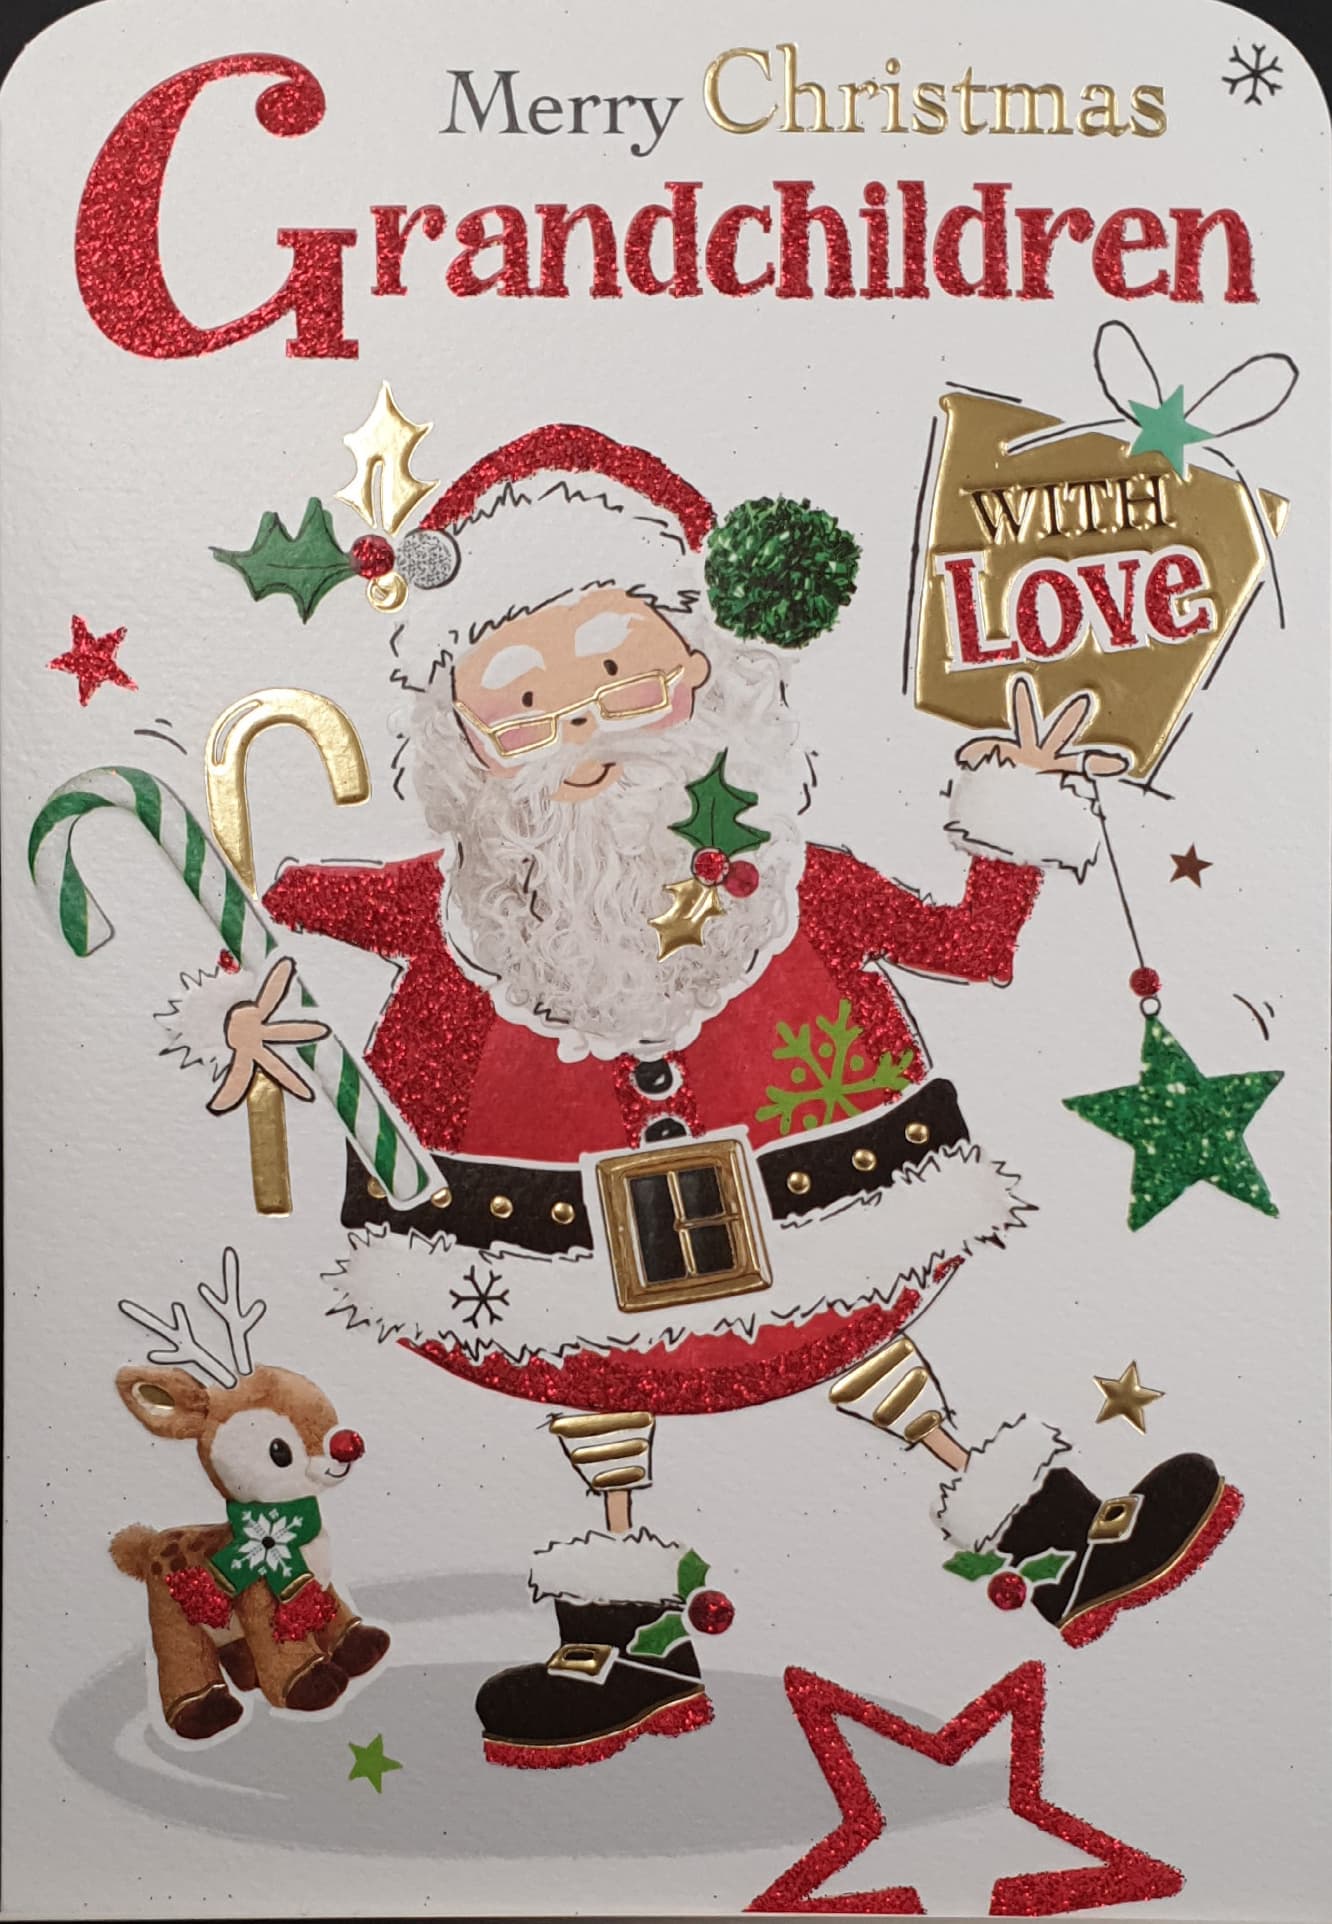 Grandchildren Christmas Card - Happy Santa Carrying Gift & Candy Canes